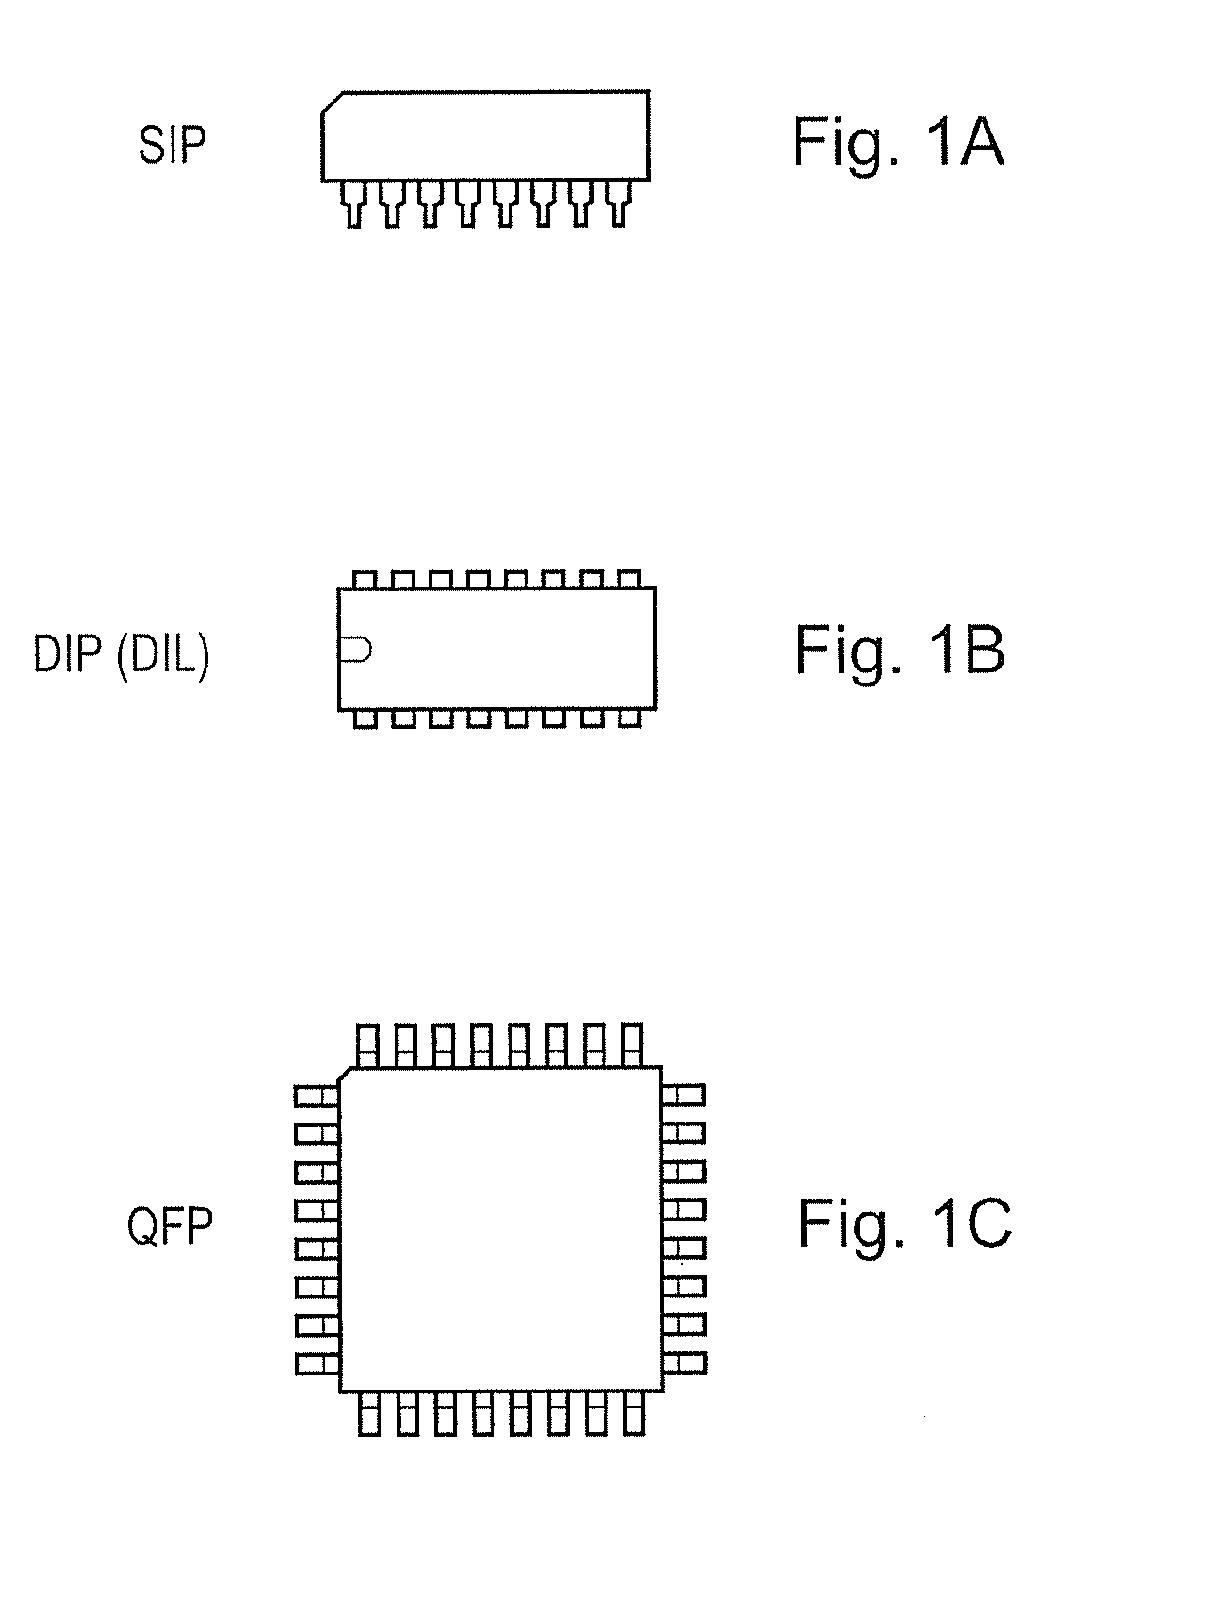 Verification of Performance Attributes of Packaged Integrated Circuits